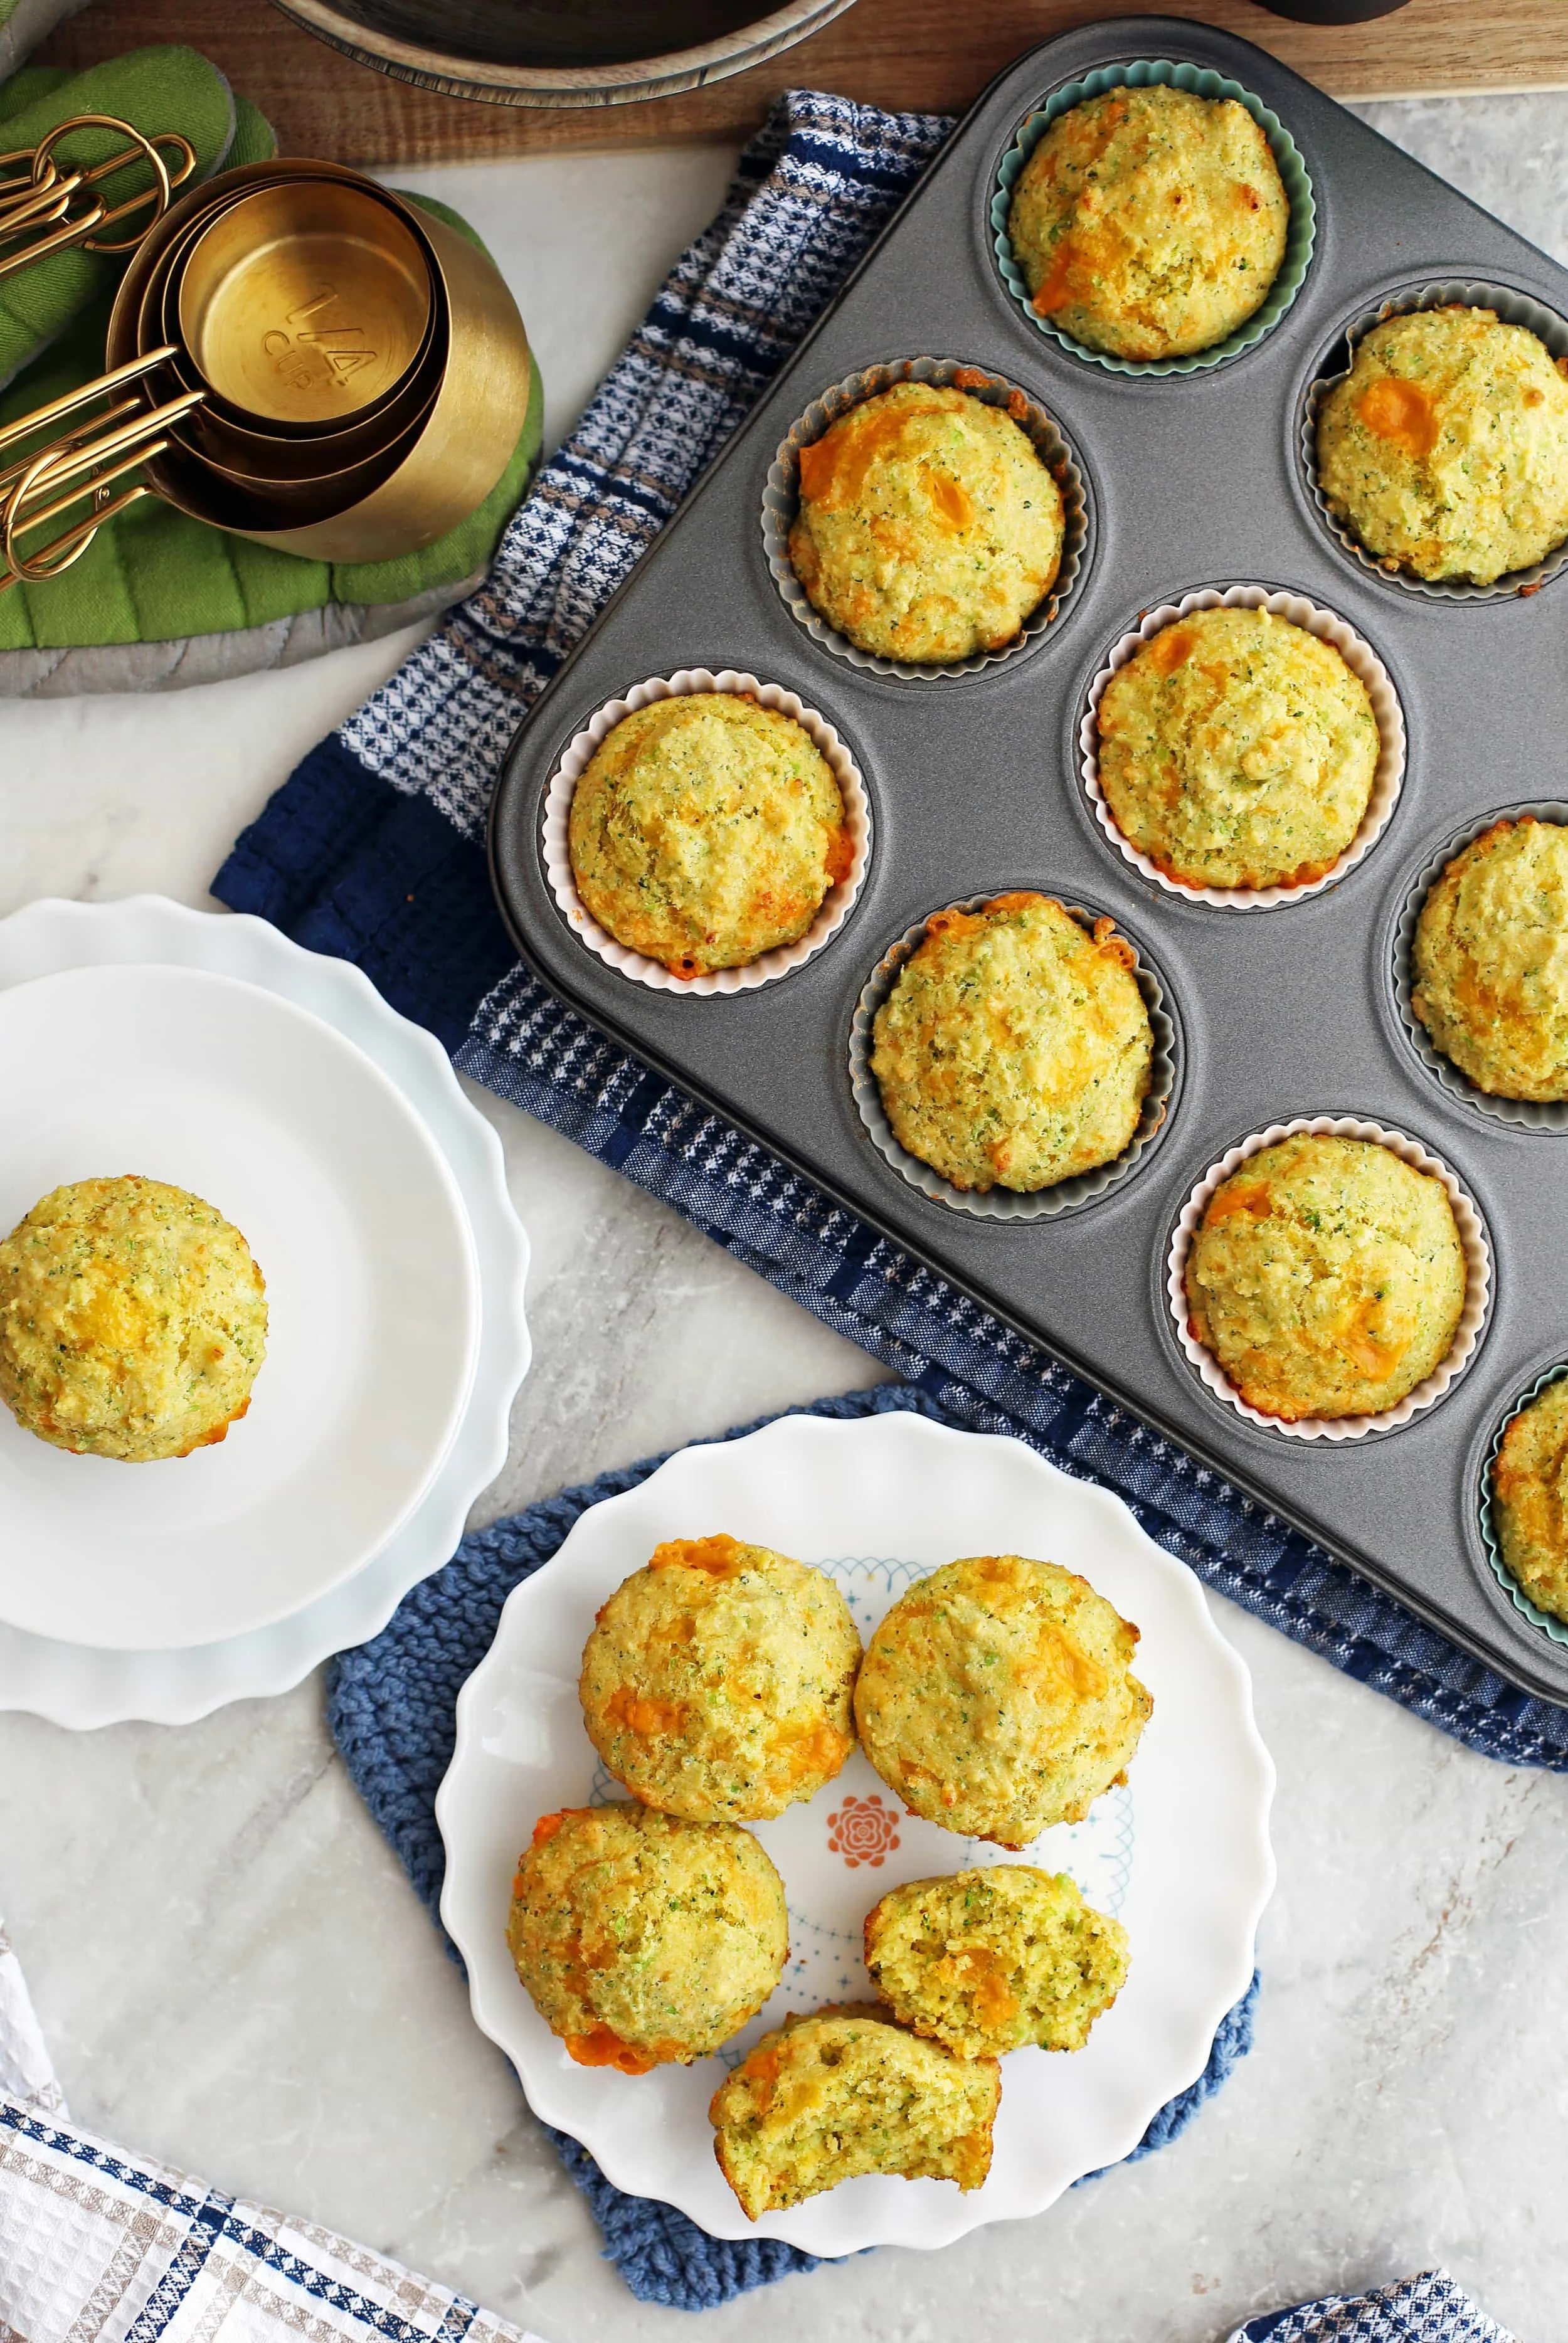 Overhead view of Broccoli Cheddar Cornbread Muffins on two white plates and a muffin pan.